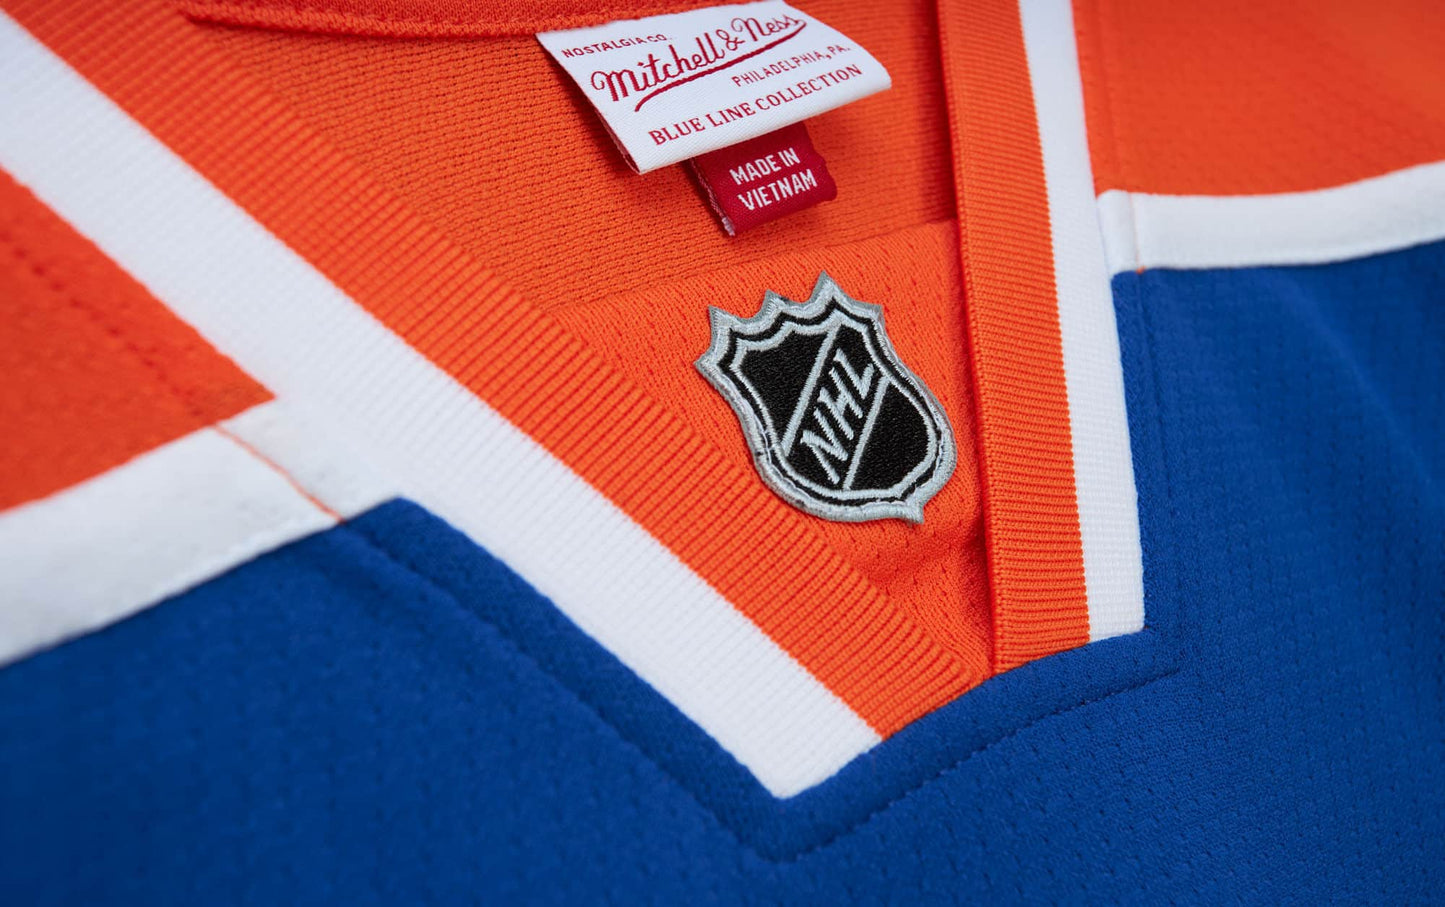 Mitchell and Ness Blue Line Connor McDavid Edmonton Oilers 2015 Jersey nhl hockey